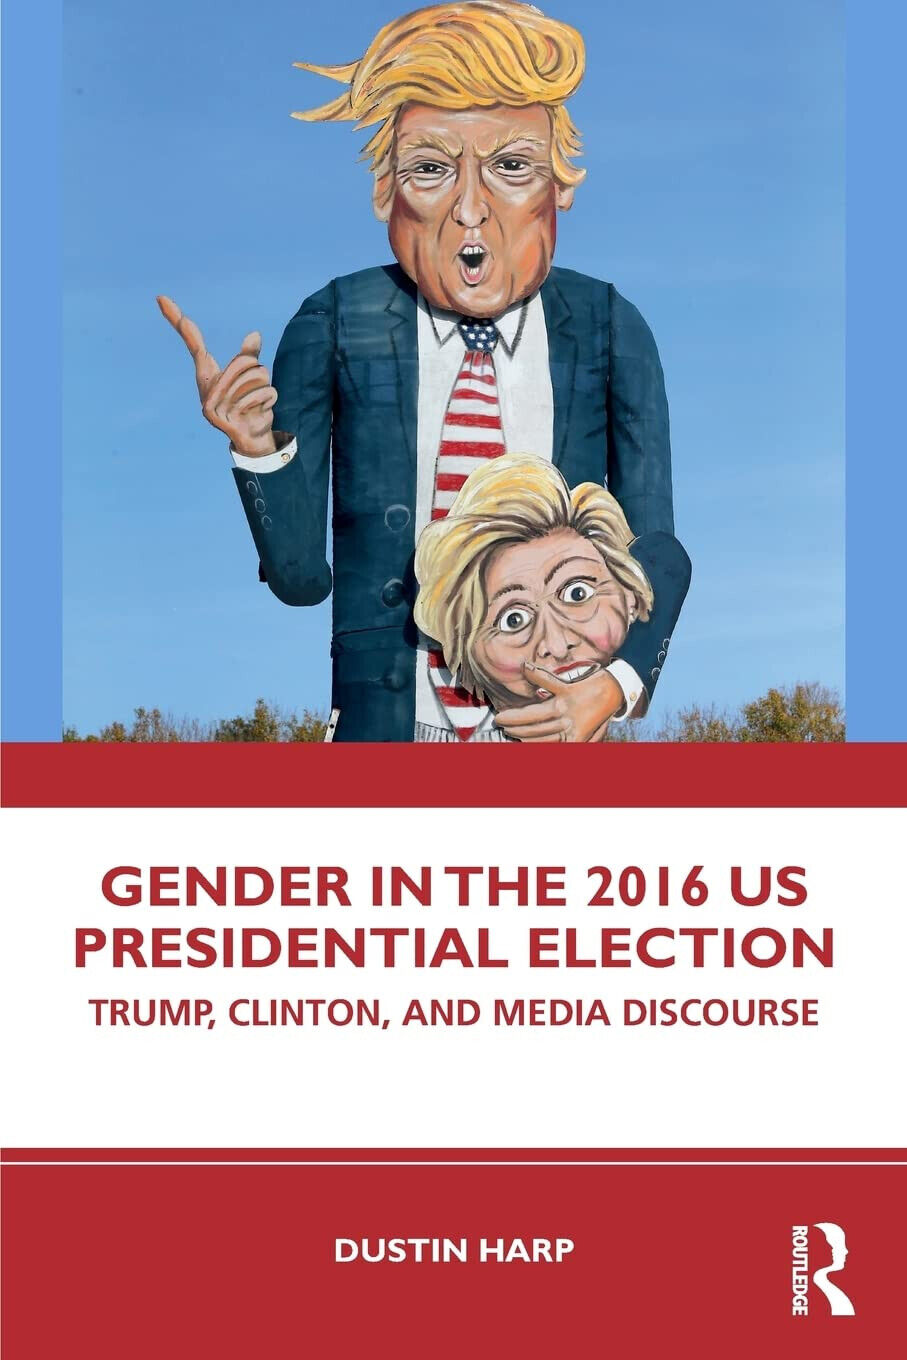 Gender in the 2016 US Presidential Election - Dustin Harp - Routledge, 2019 libro usato